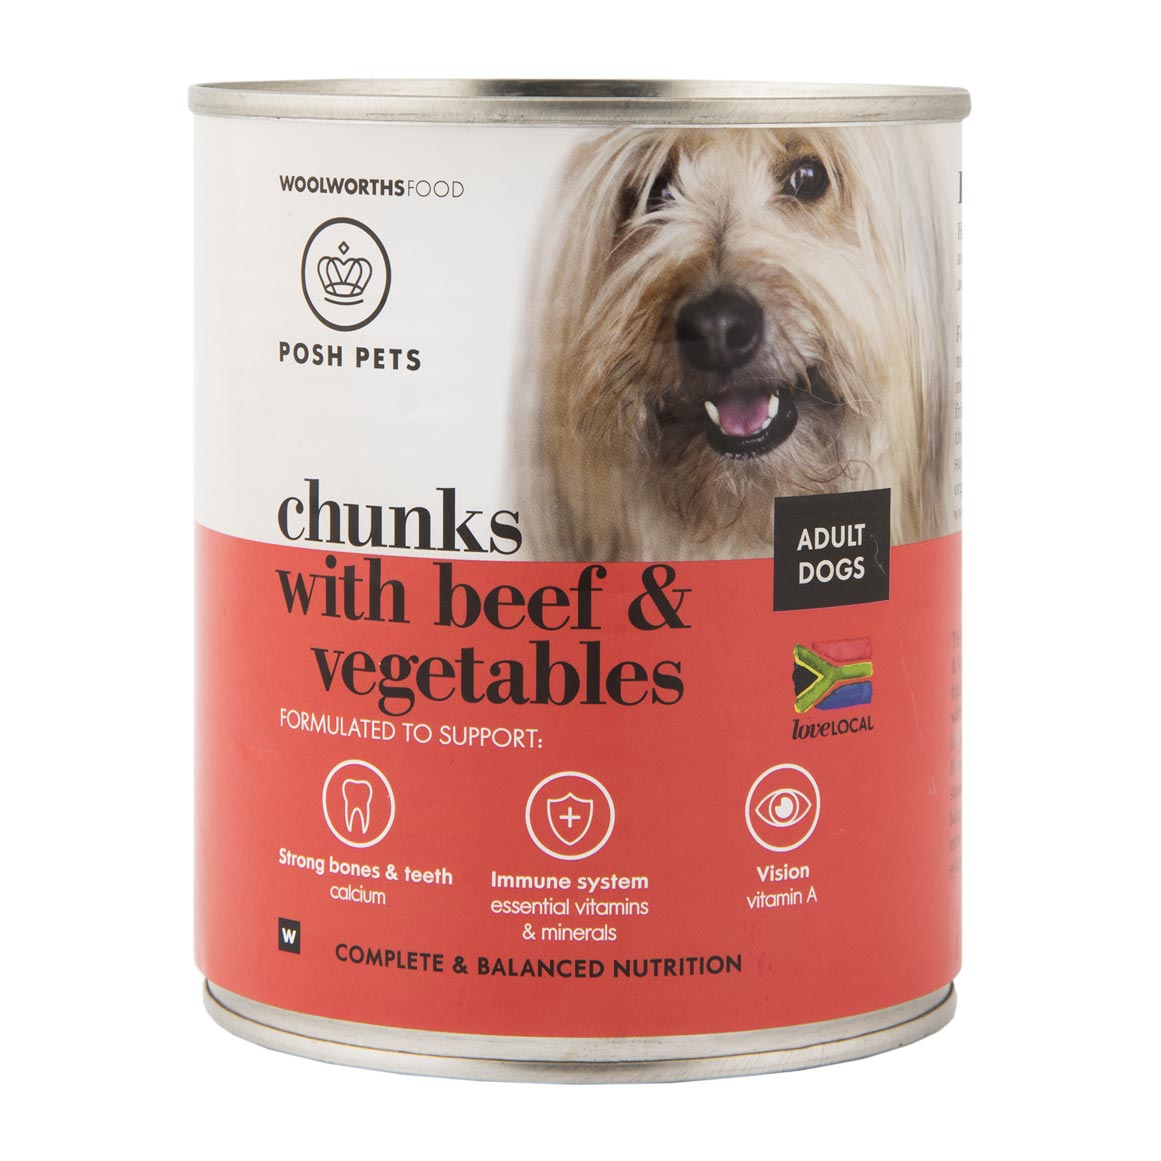 Posh Pets Chunks with Beef and Vegetables Adult Dog Food 775 g ...